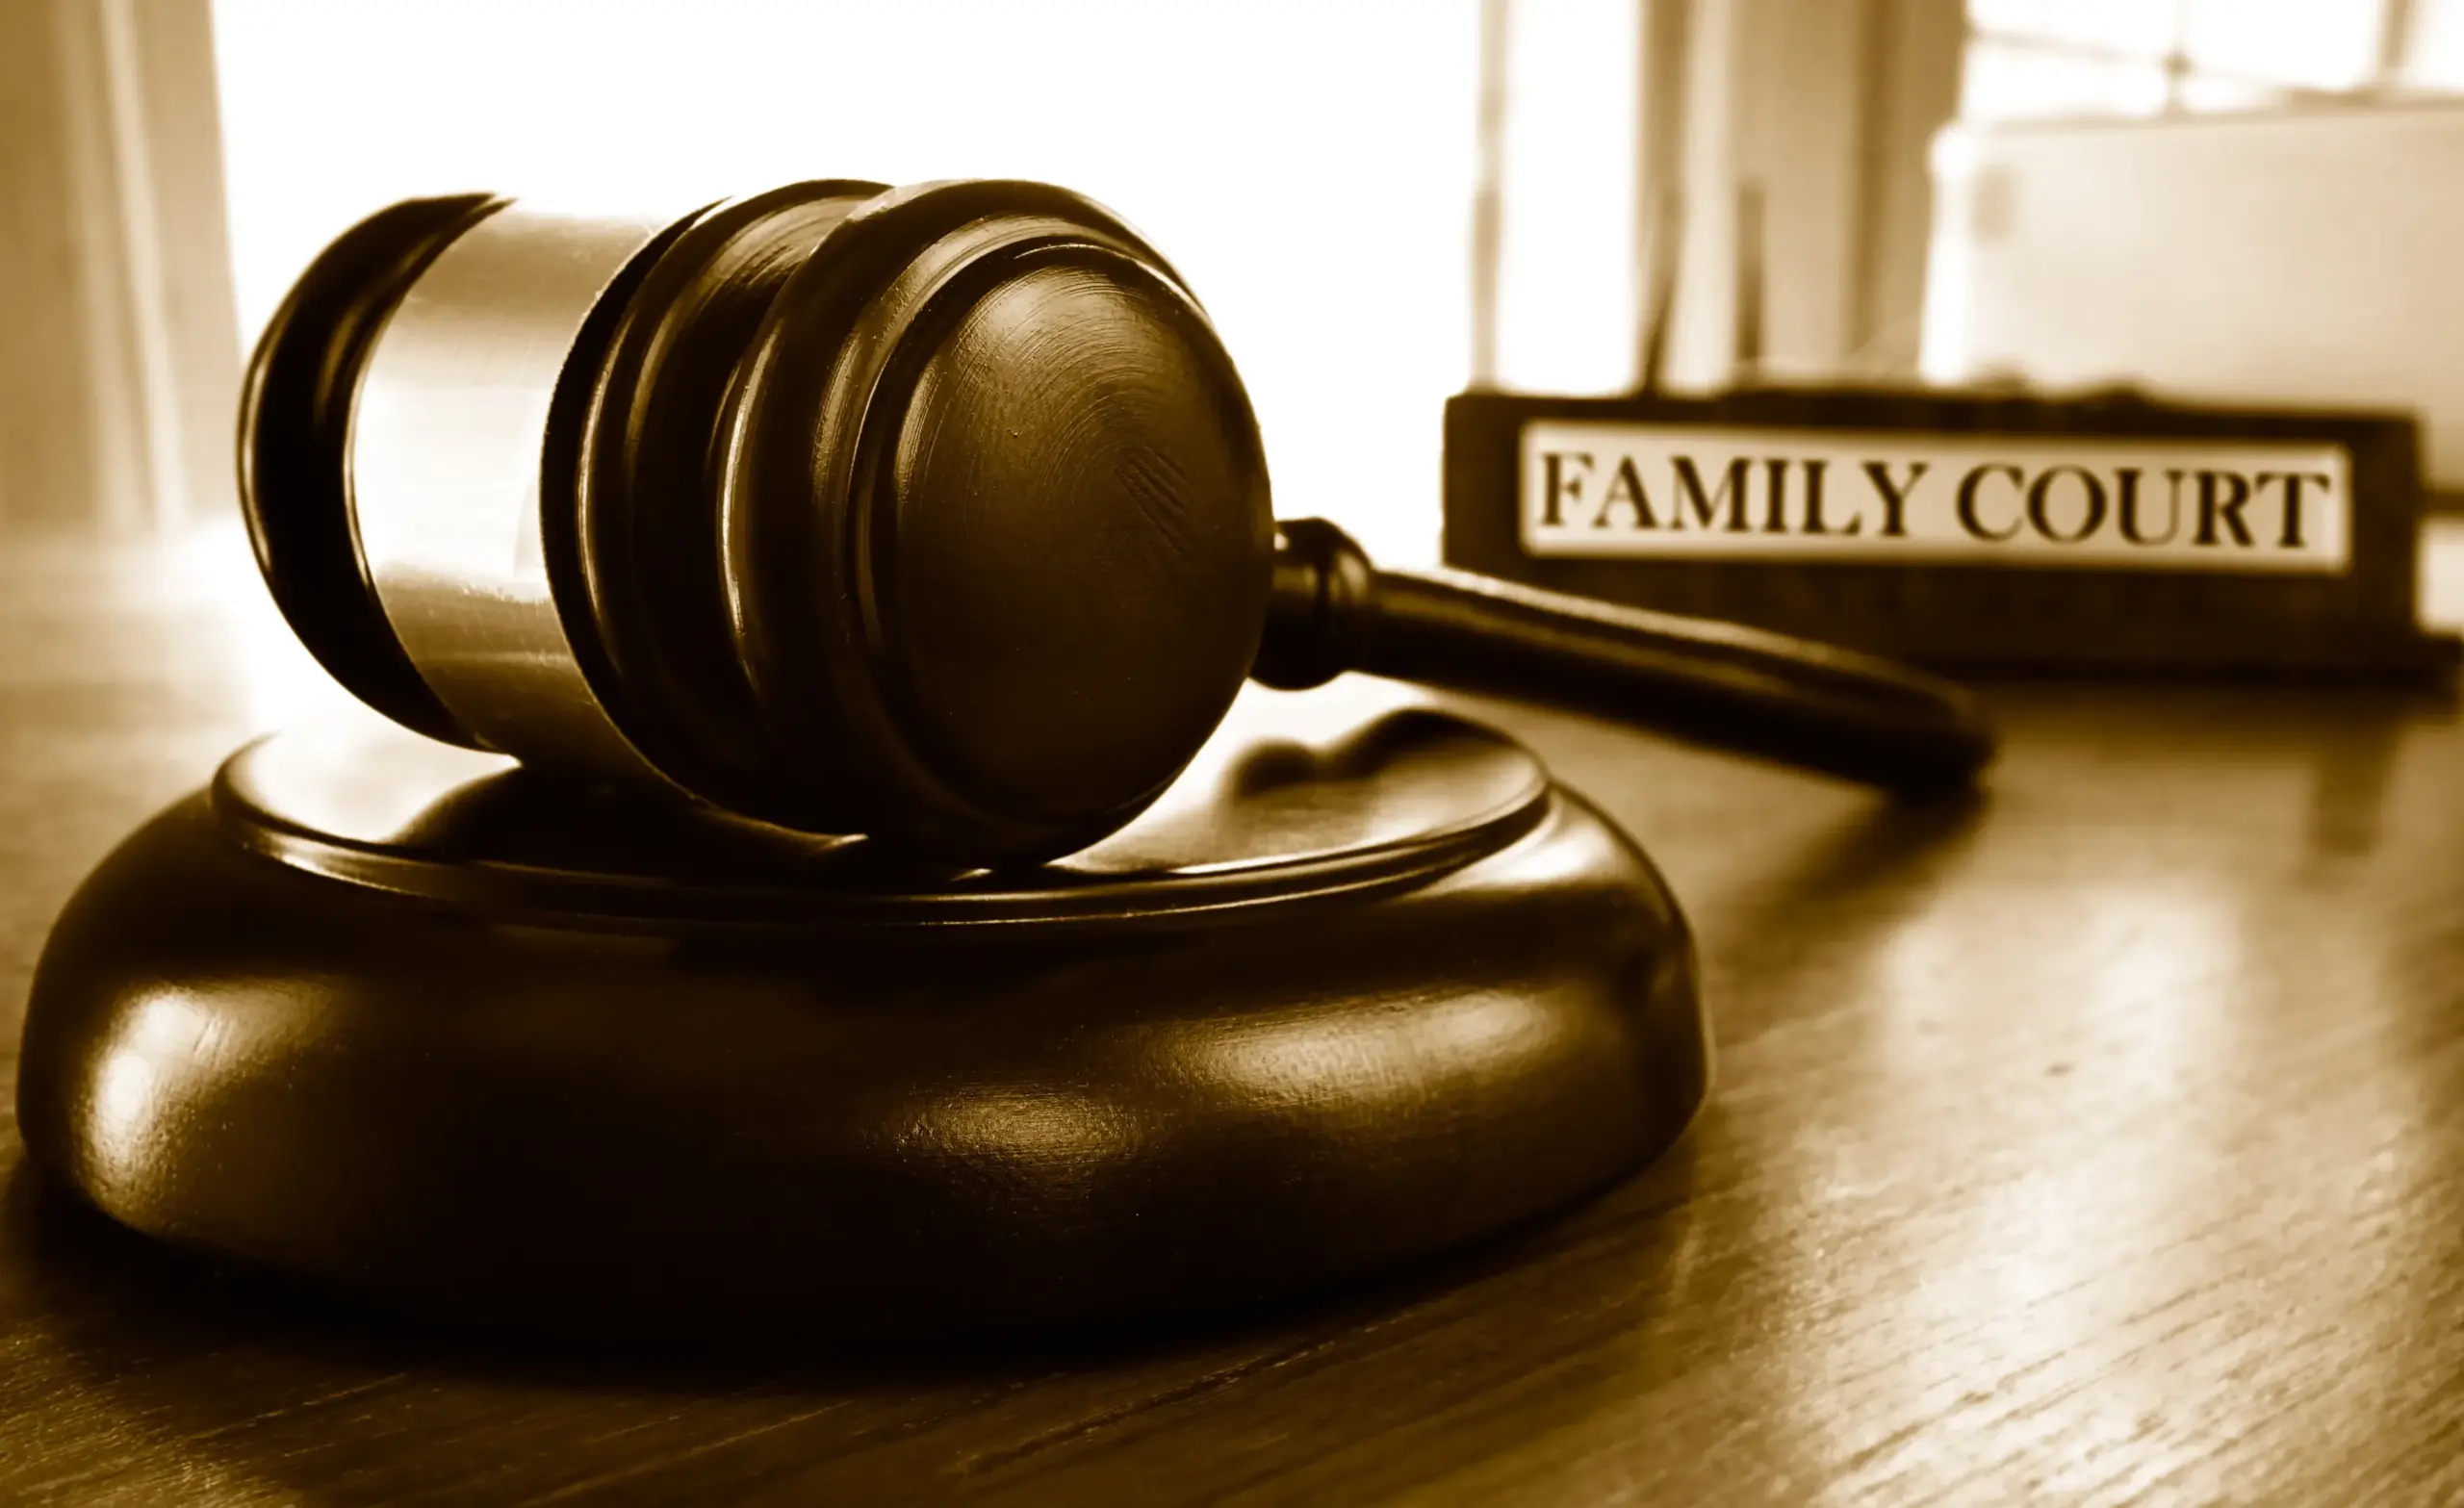 A judge's gavel in front of a desk sign that reads "Family Court".